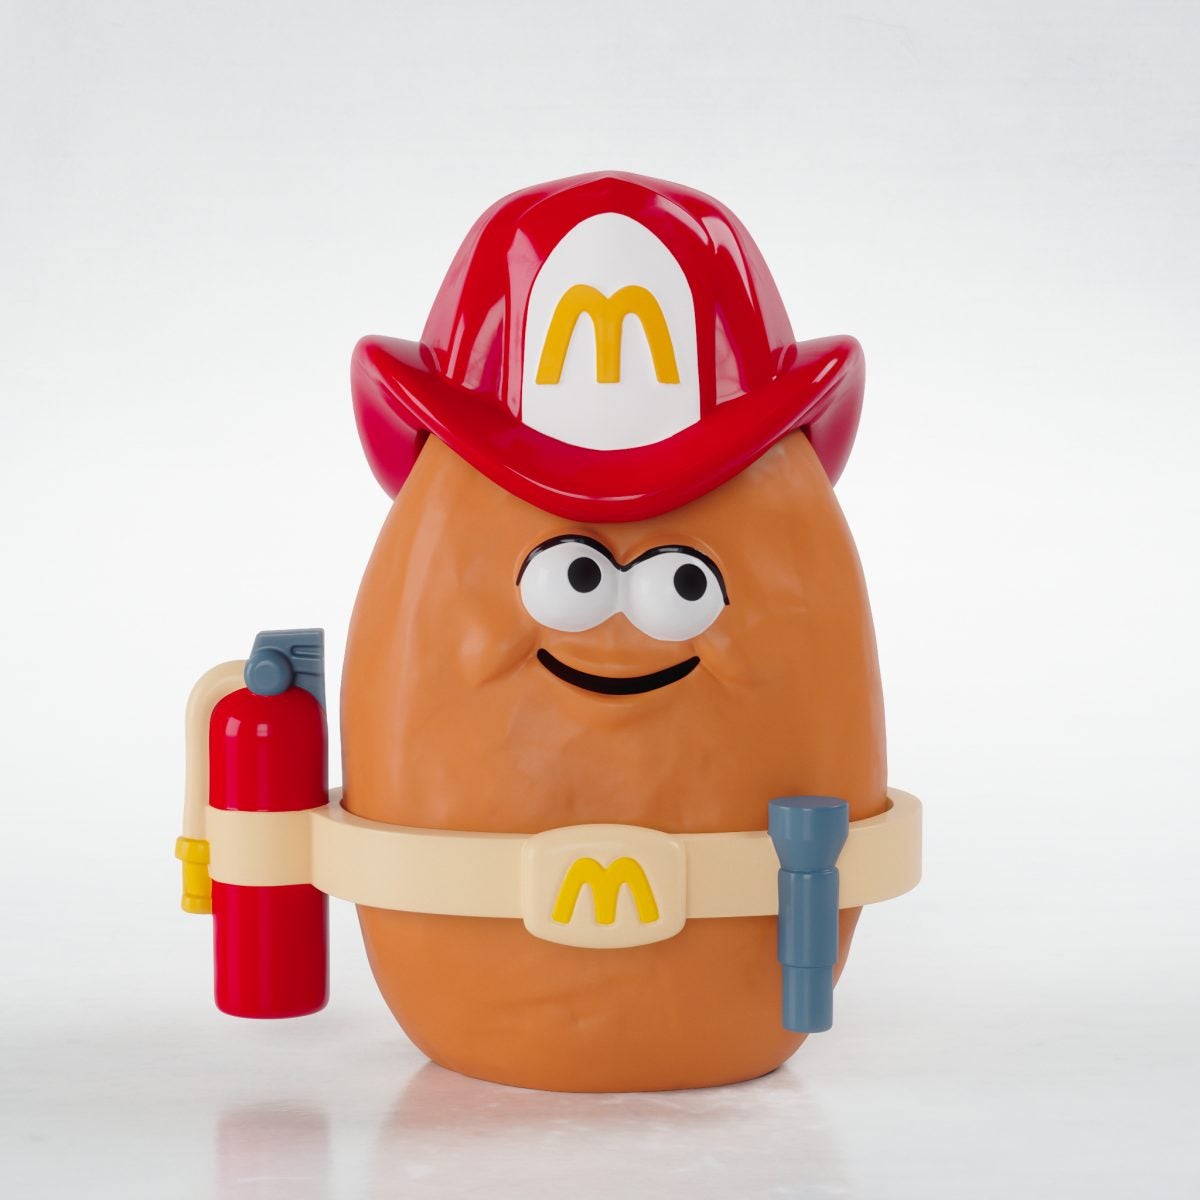 Iconic Mcdonald's Happy Meal Toys From Our Childhood Available From Nov 28 &Amp; We're Feeling Nostalgic - World Of Buzz 4